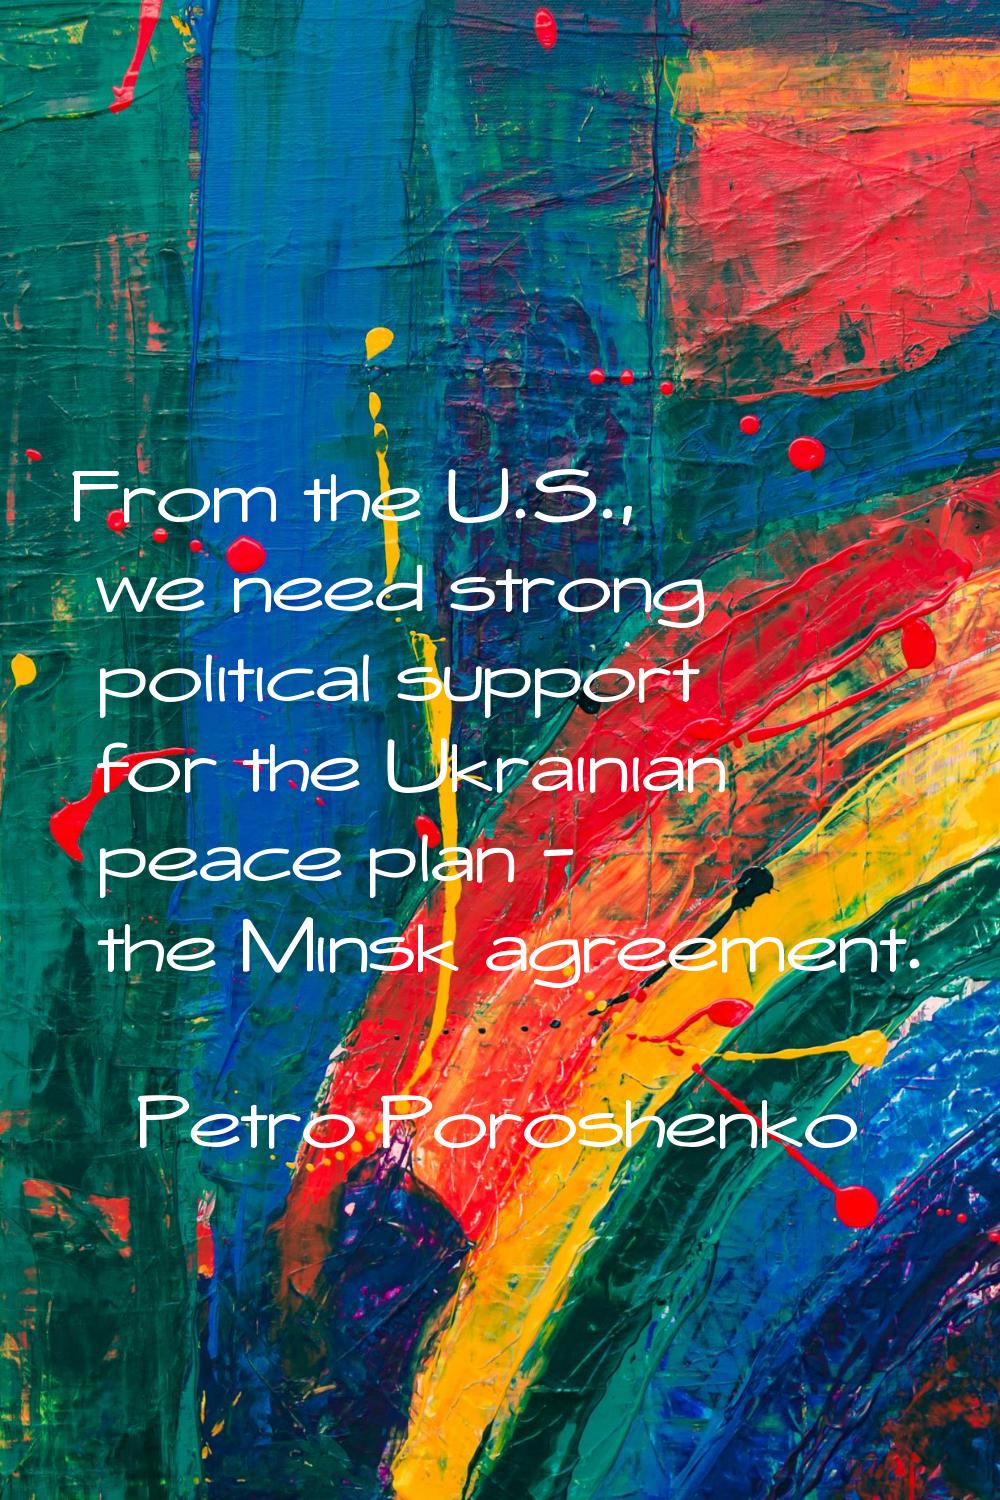 From the U.S., we need strong political support for the Ukrainian peace plan - the Minsk agreement.